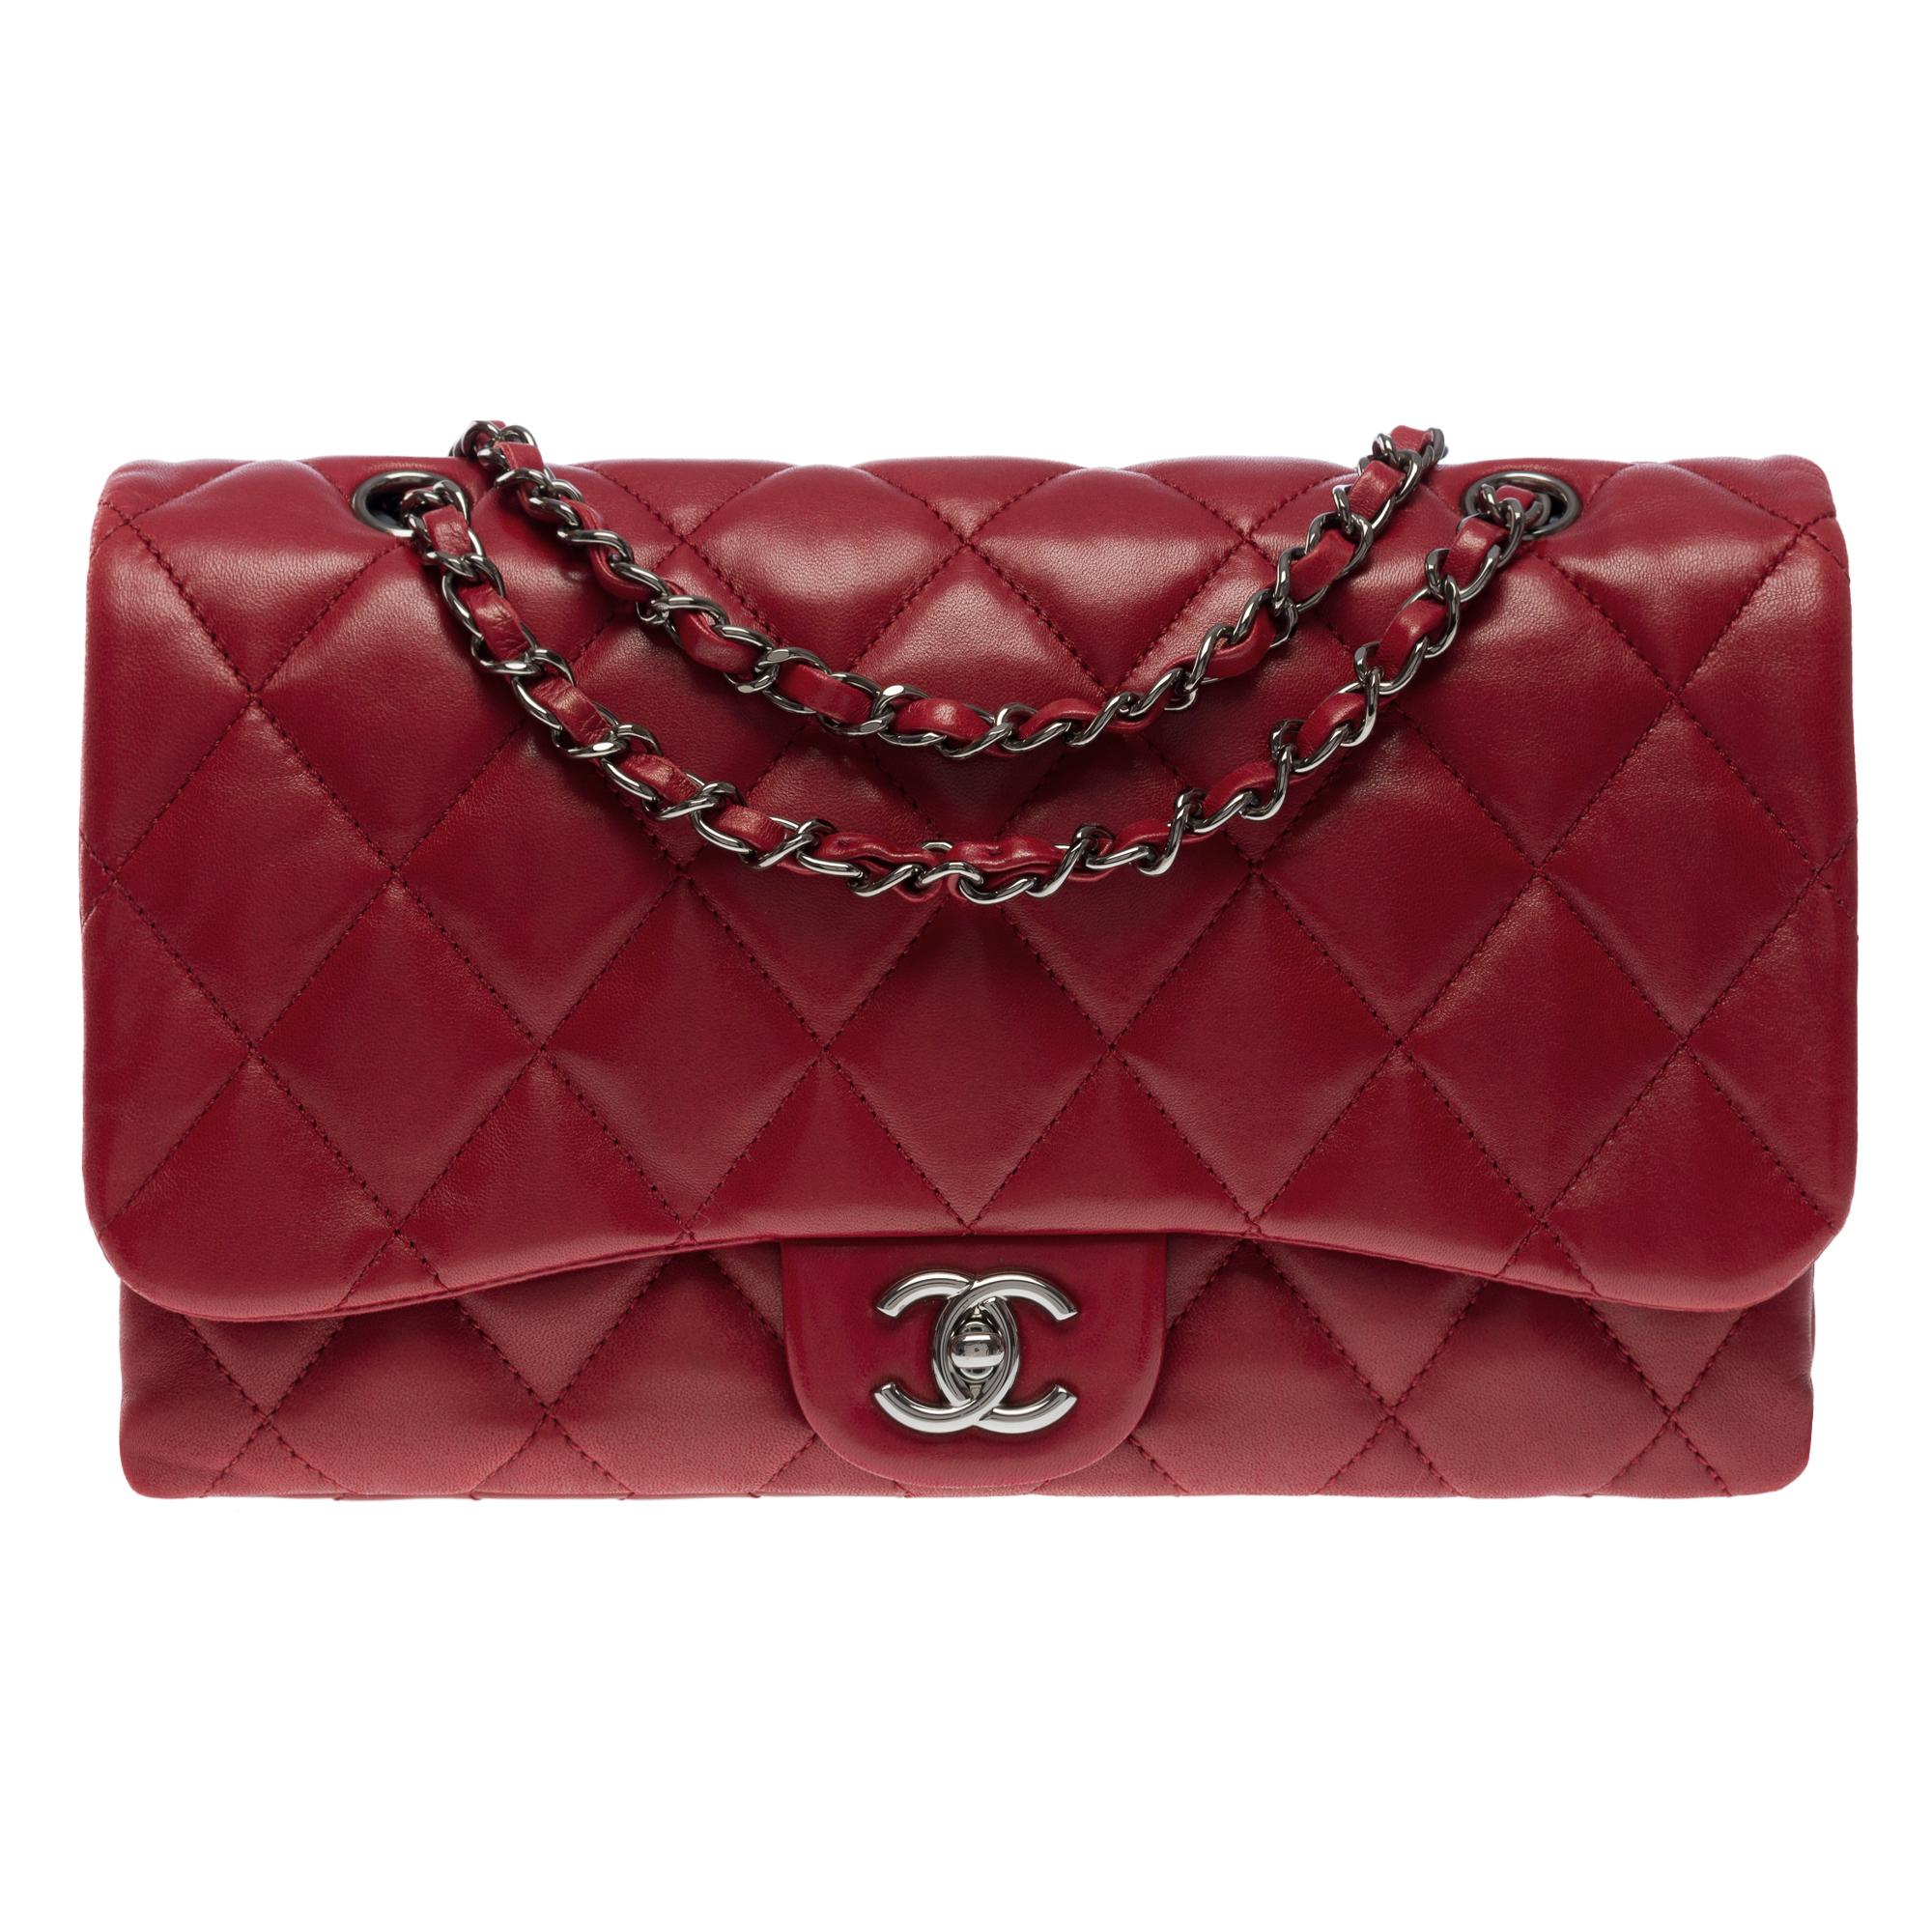 Gorgeous Chanel Classic shoulder flap bag with bellows in garnet red quilted lambskin leather, silver metal hardware, a silver metal chain handle intertwined with red leather for shoulder and crossbody carry

Closure by flap, silver CC logo